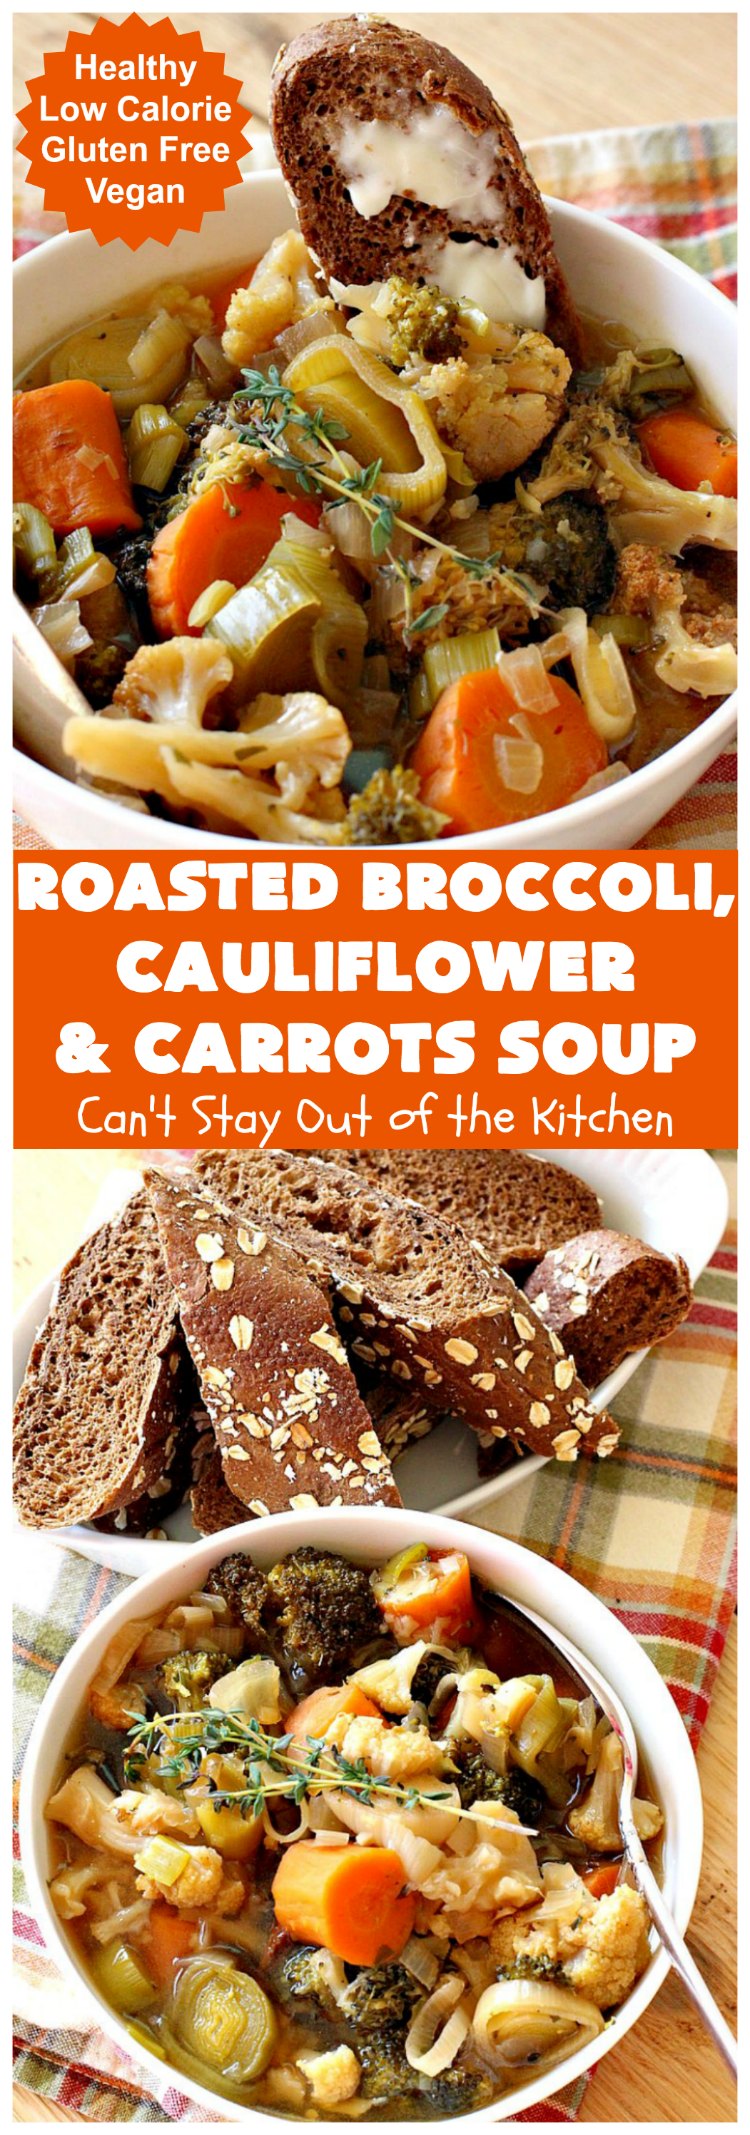 Roasted Broccoli, Cauliflower and Carrots Soup | Can't Stay Out of the Kitchen | this amazing #soup starts with roasting the #vegetables which really enhances the flavor. This comfort food #recipe is perfect for cold, winter nights. It's also #healthy, #LowCalorie, #vegan & #GlutenFree. #Broccoli #carrots #Cauliflower #BroccoliCauliflowerAndCarrotsSoup